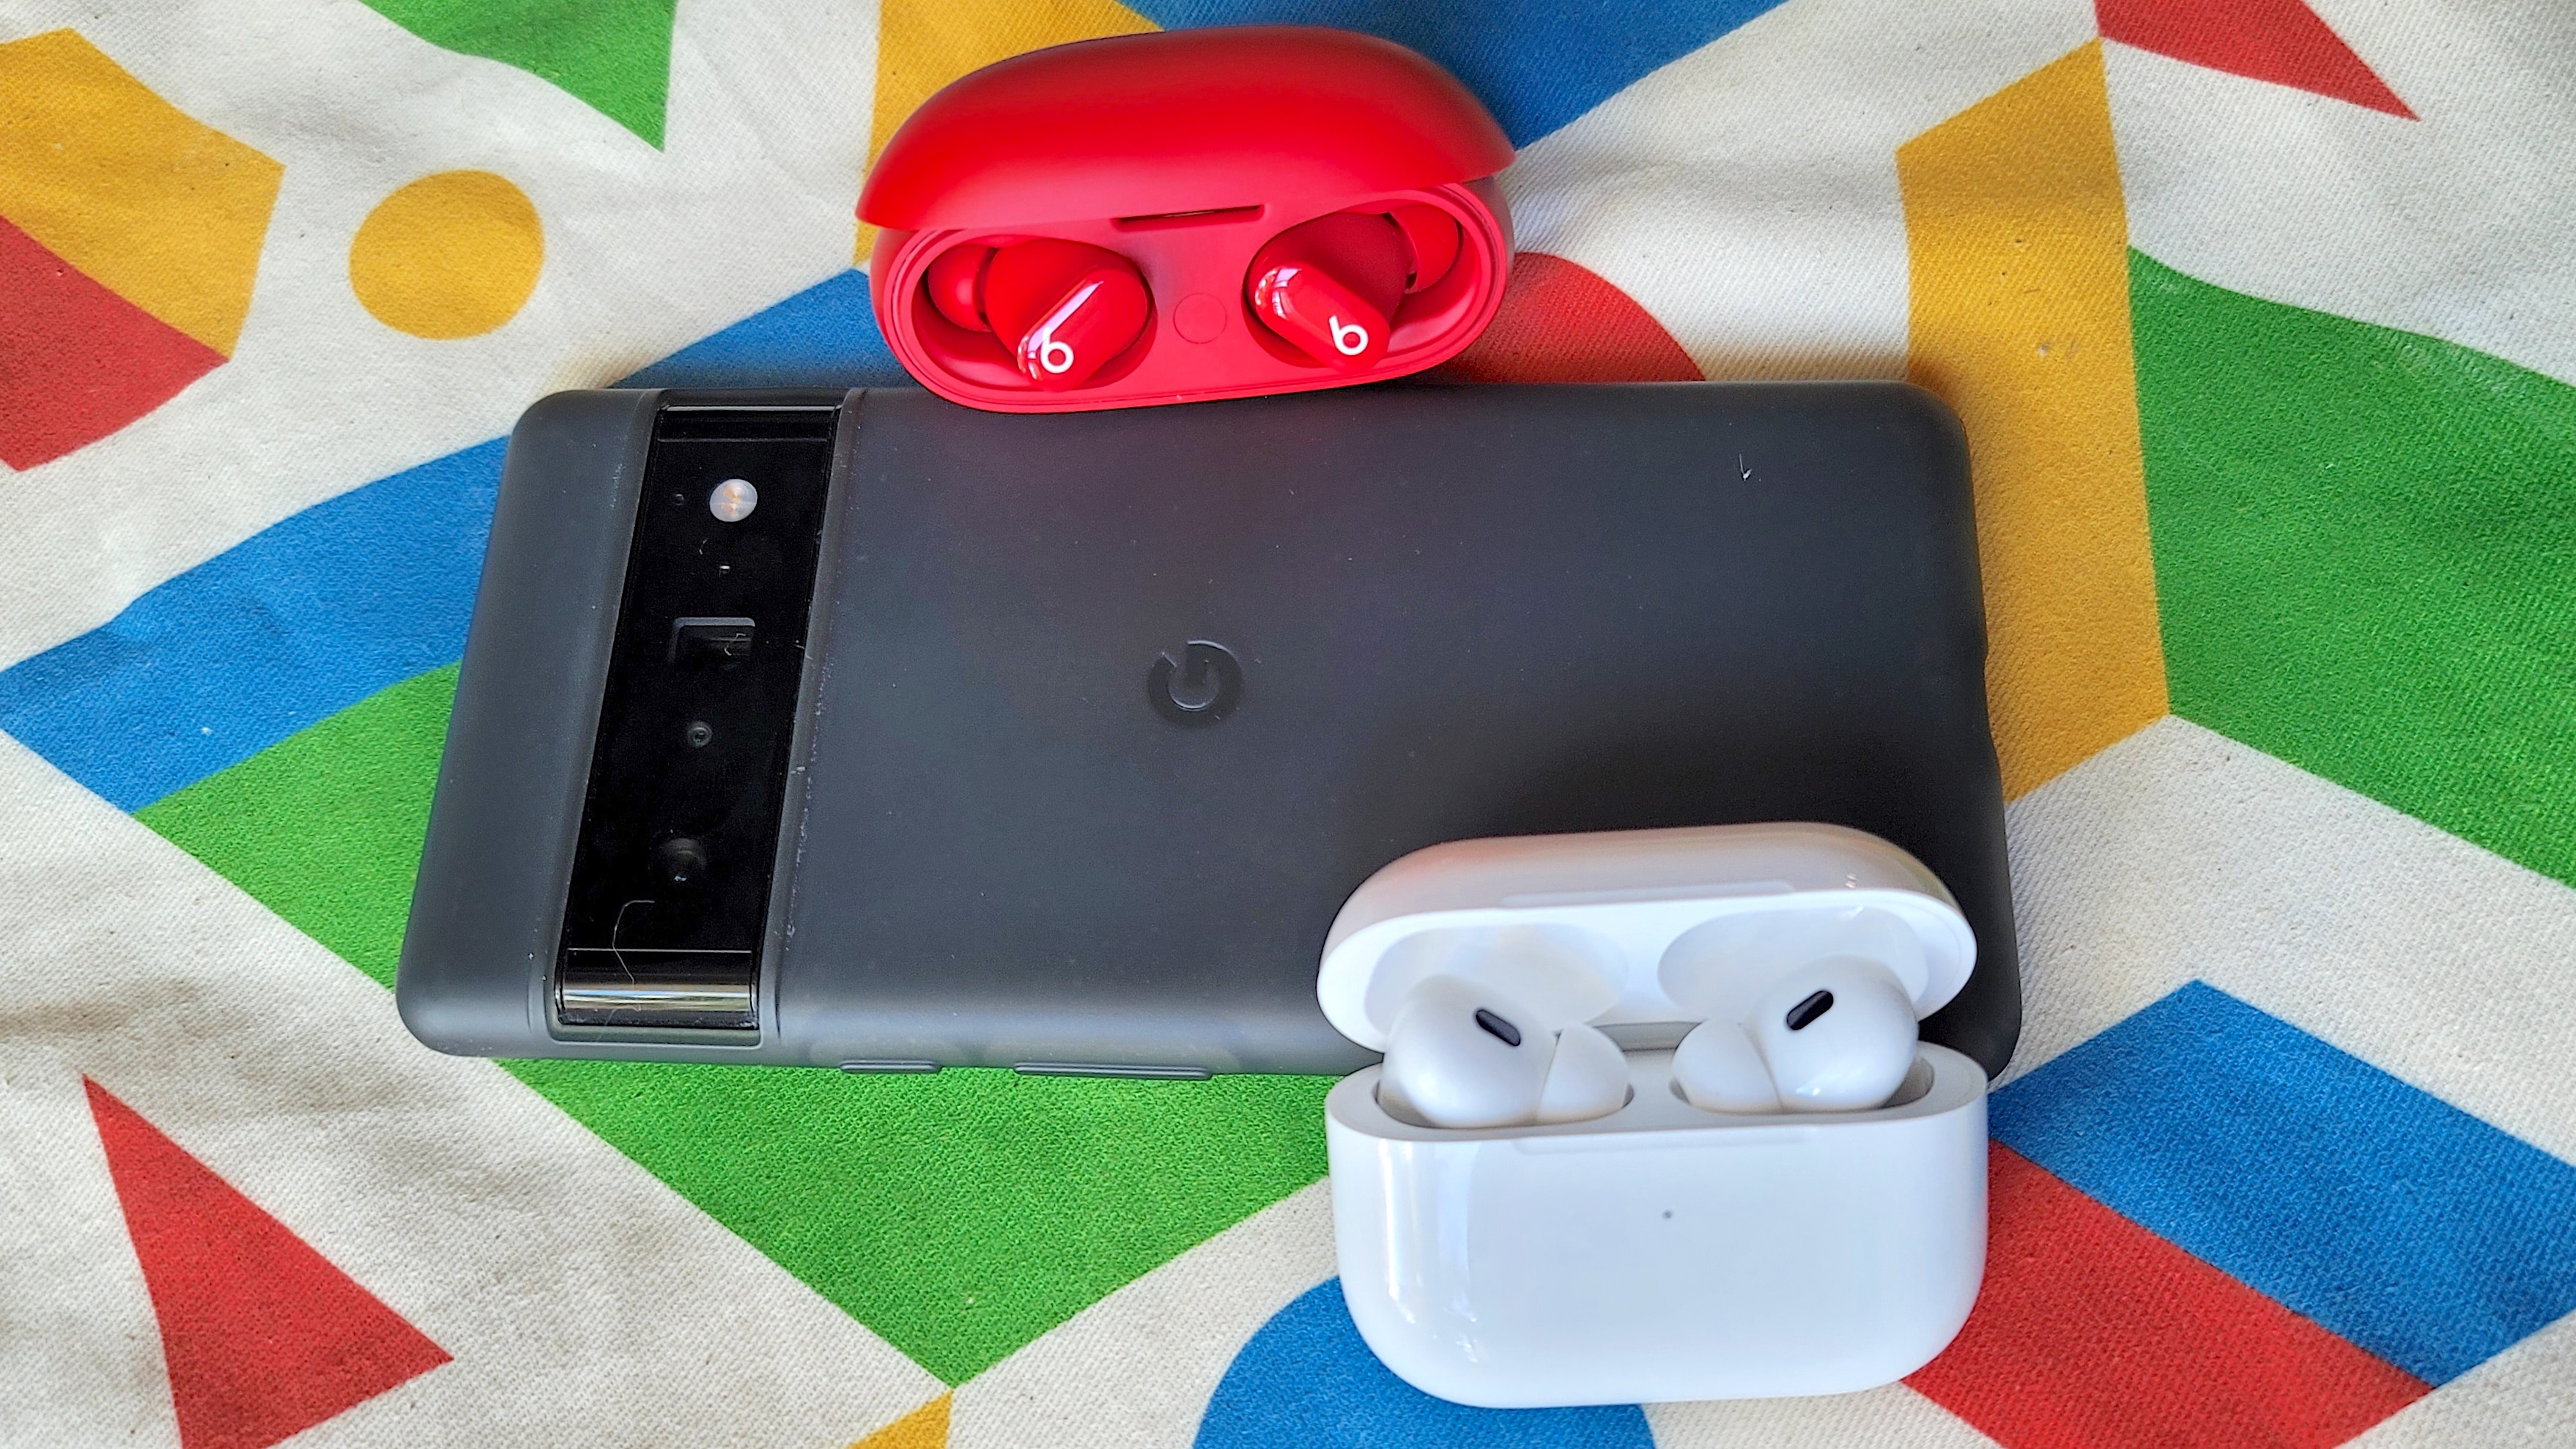 The AirPods Pro 2 and Beats Studio Buds sitting on top of the Google Pixel 6